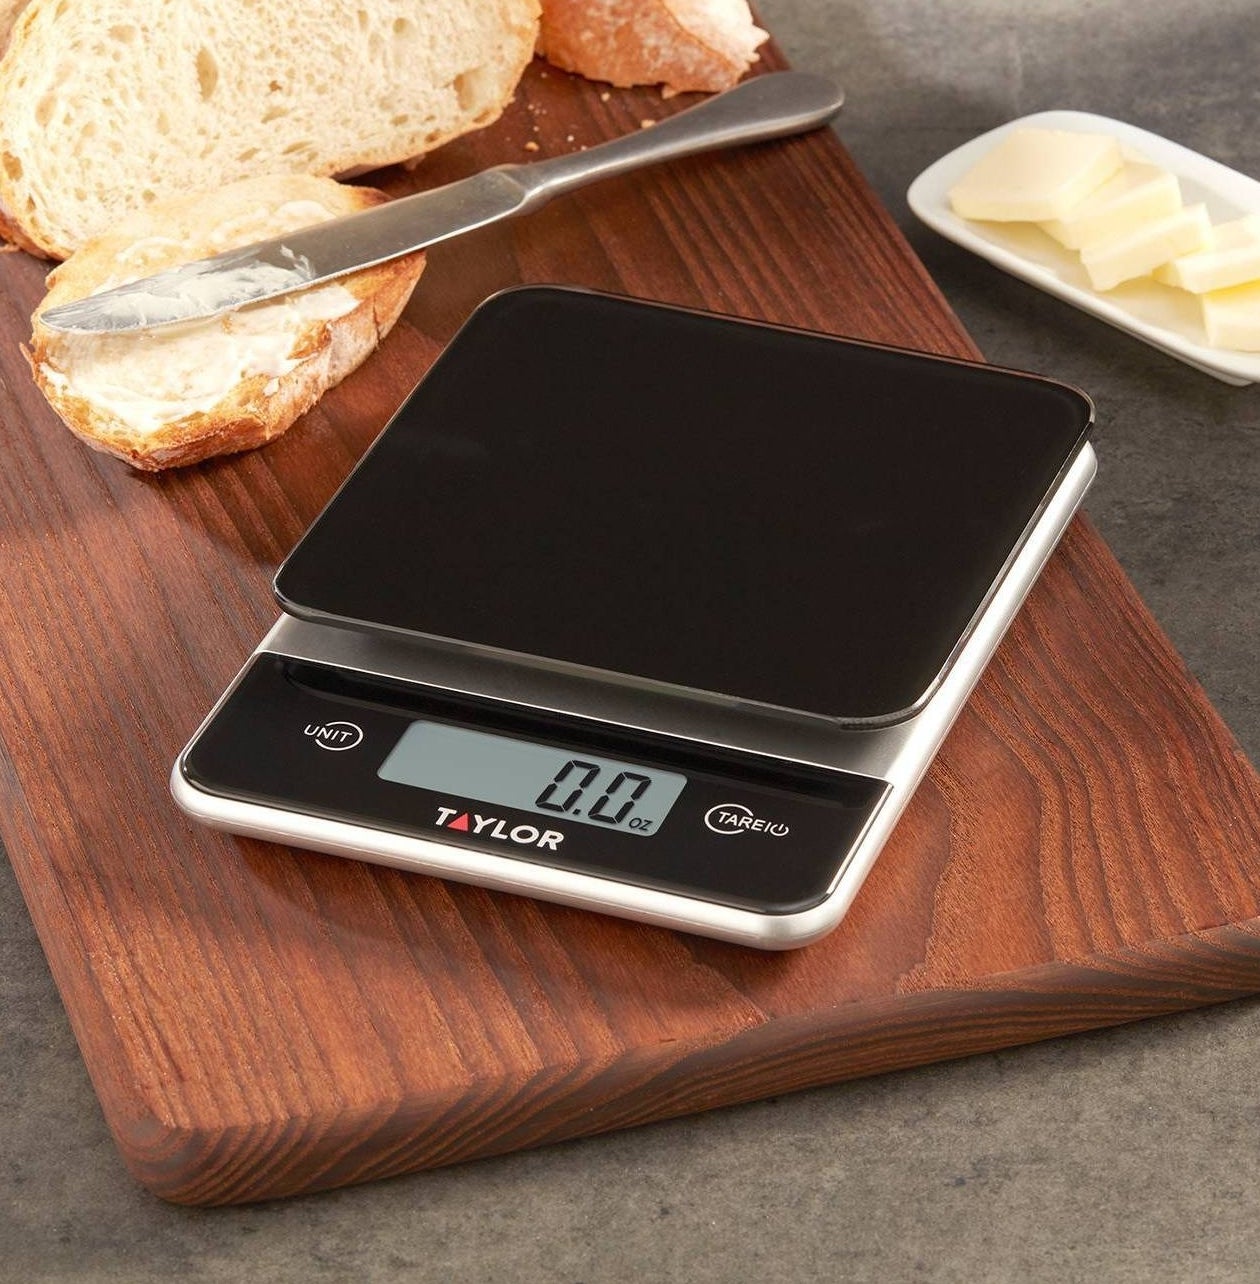 The food scale